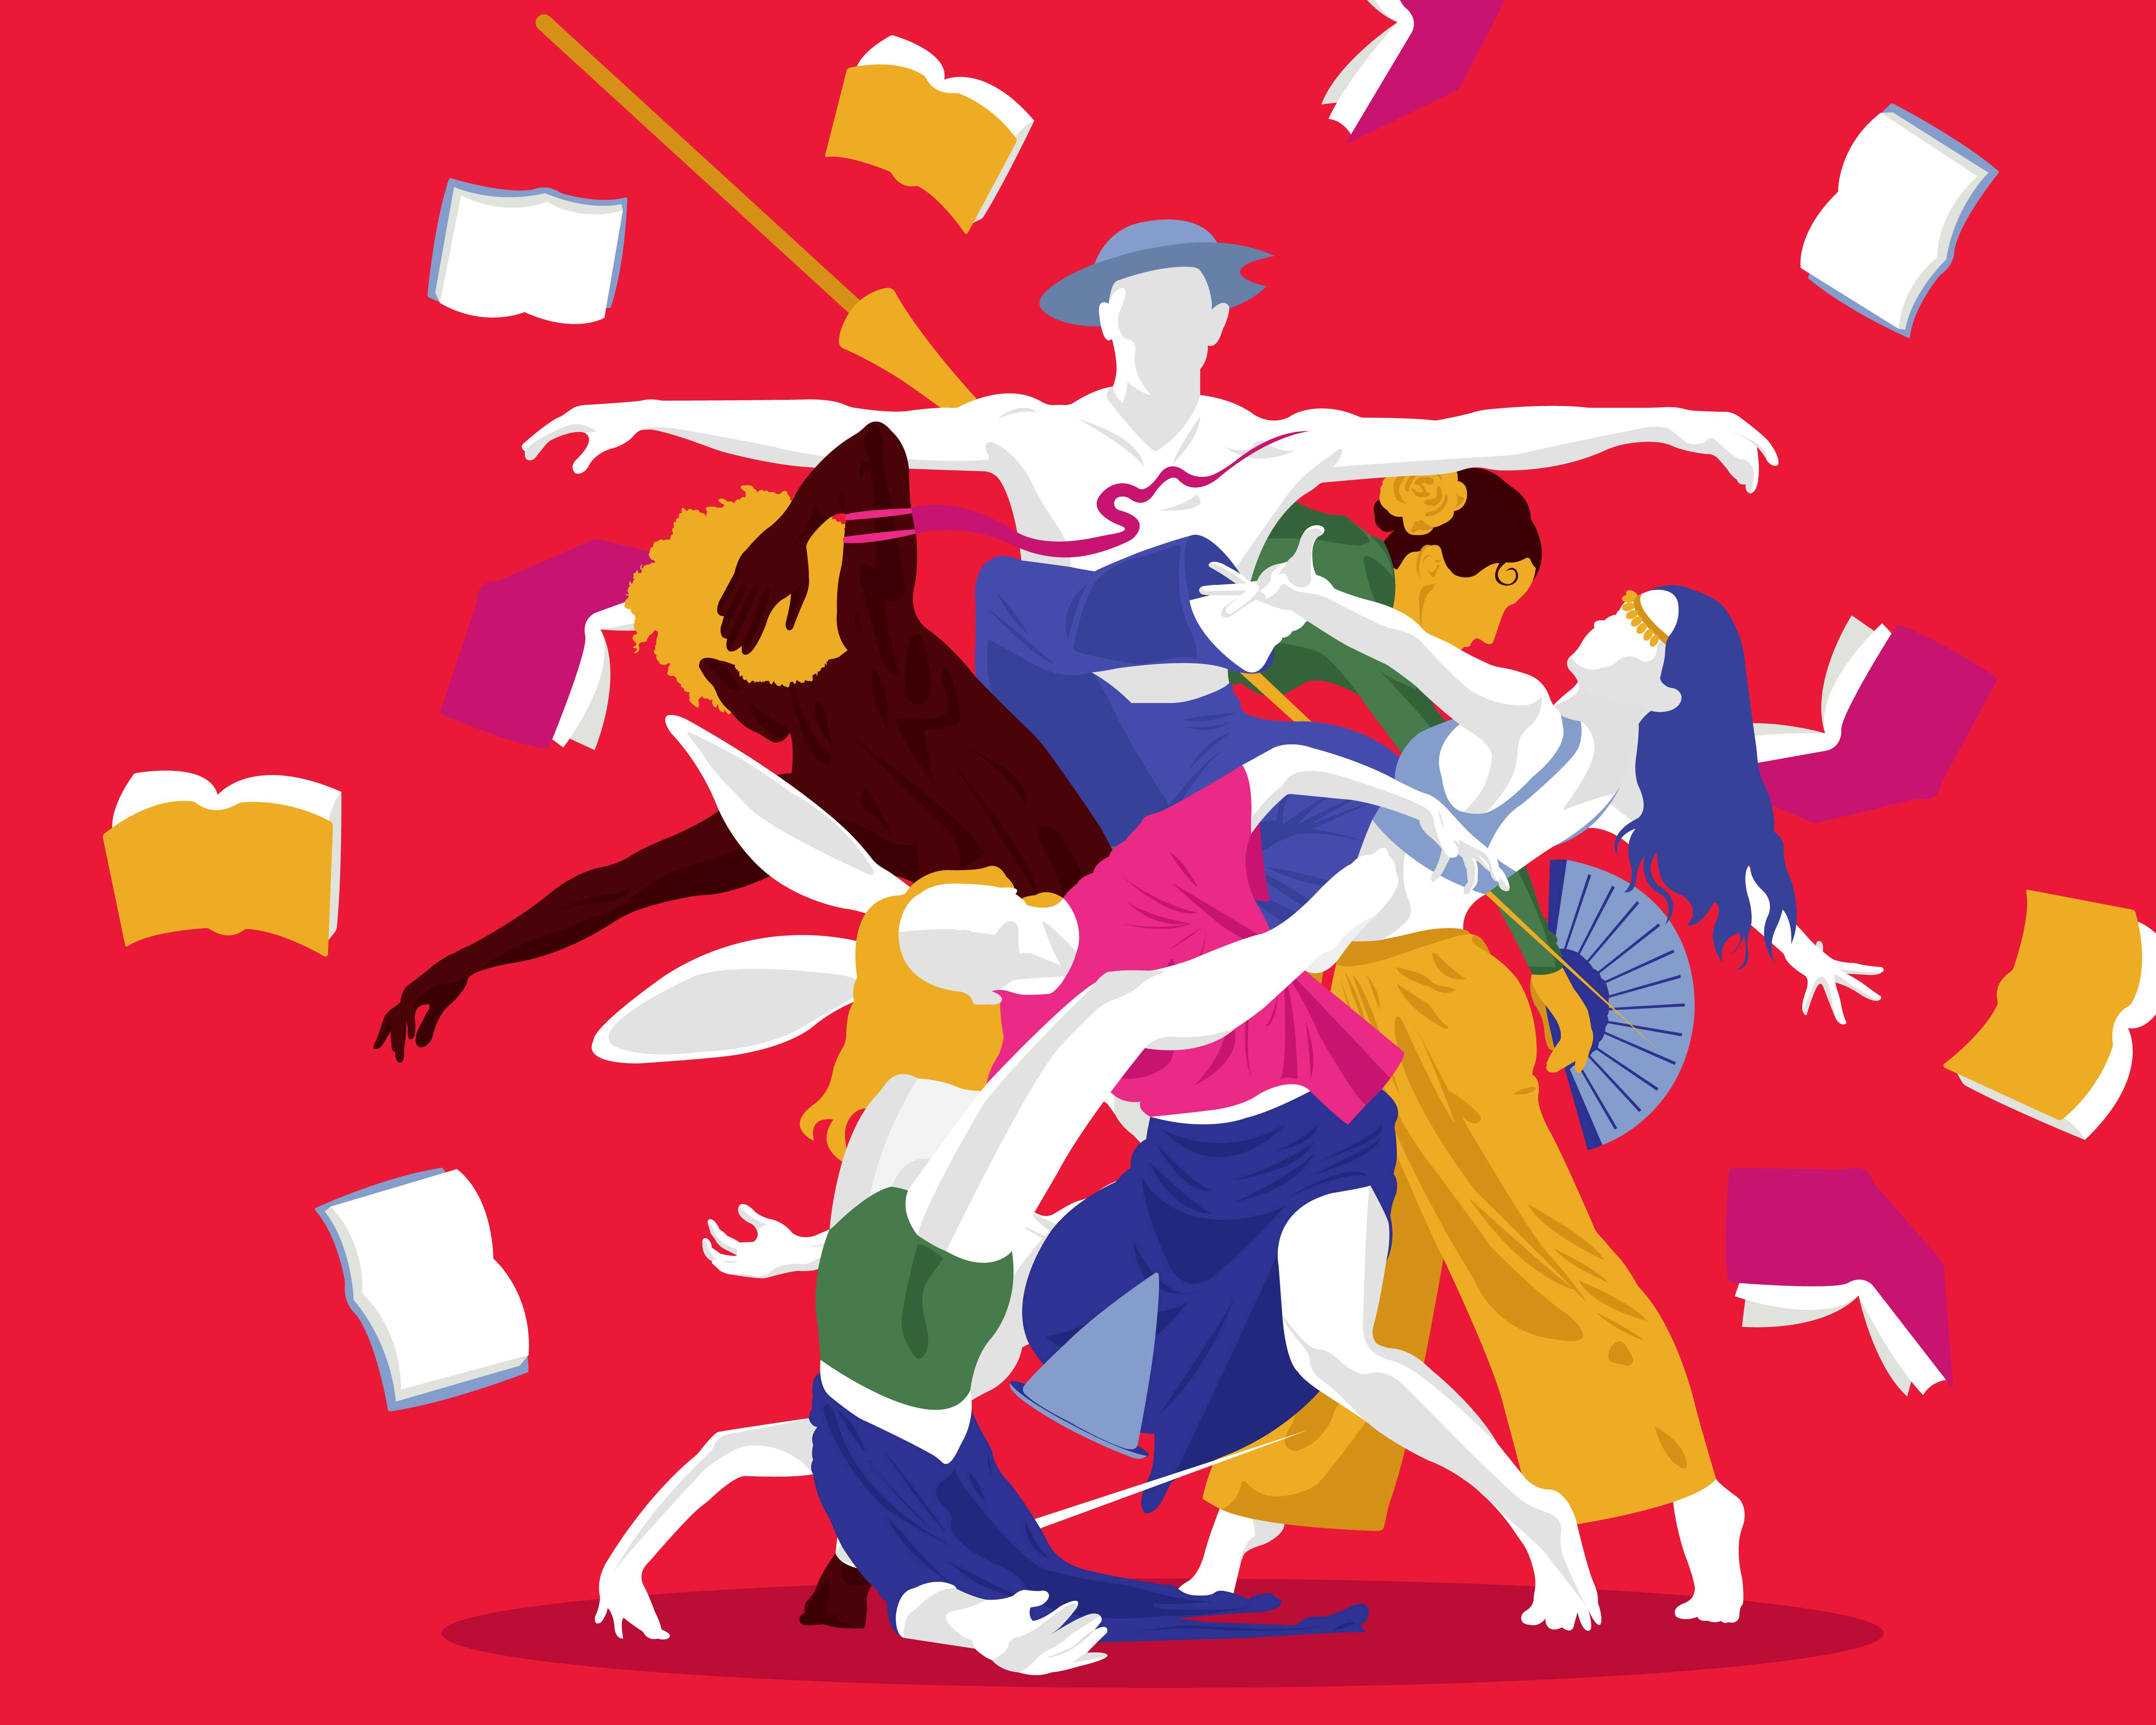 Illustration depicting a series of characters from literature as they perform dance moves. They are surrounded by open books suspended in the air.